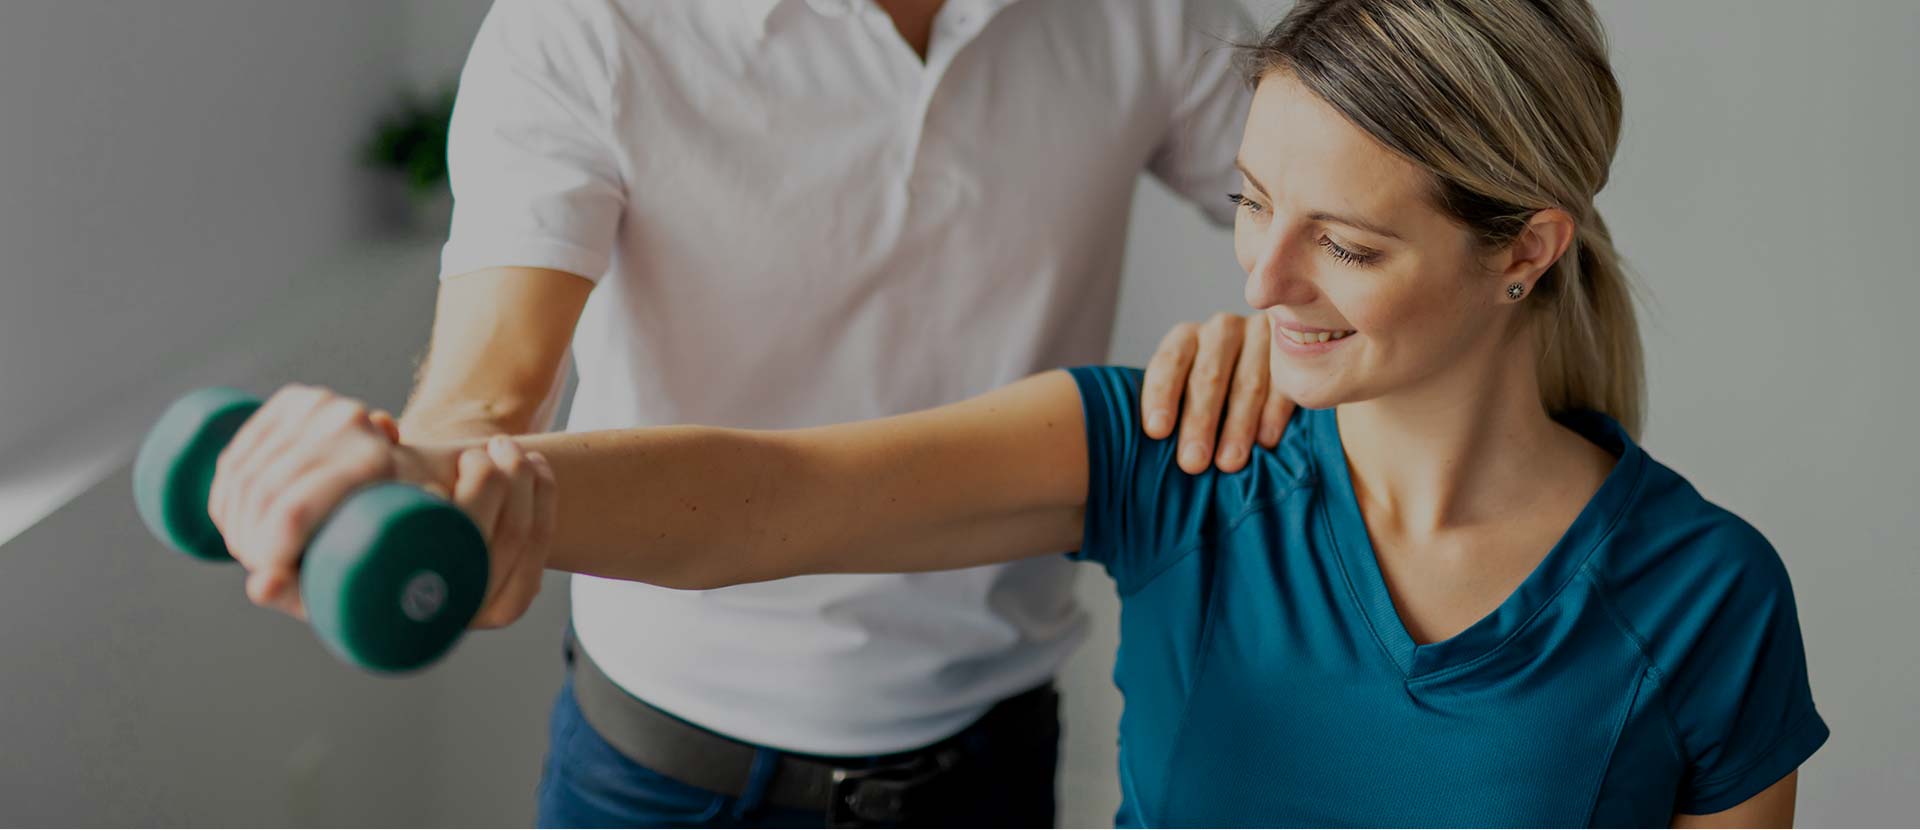 Physical therapy for shoulder and arm in the Indianapolis area from Milestone Physical Therapy & Training | Brad Howell, DPT | Indianapolis